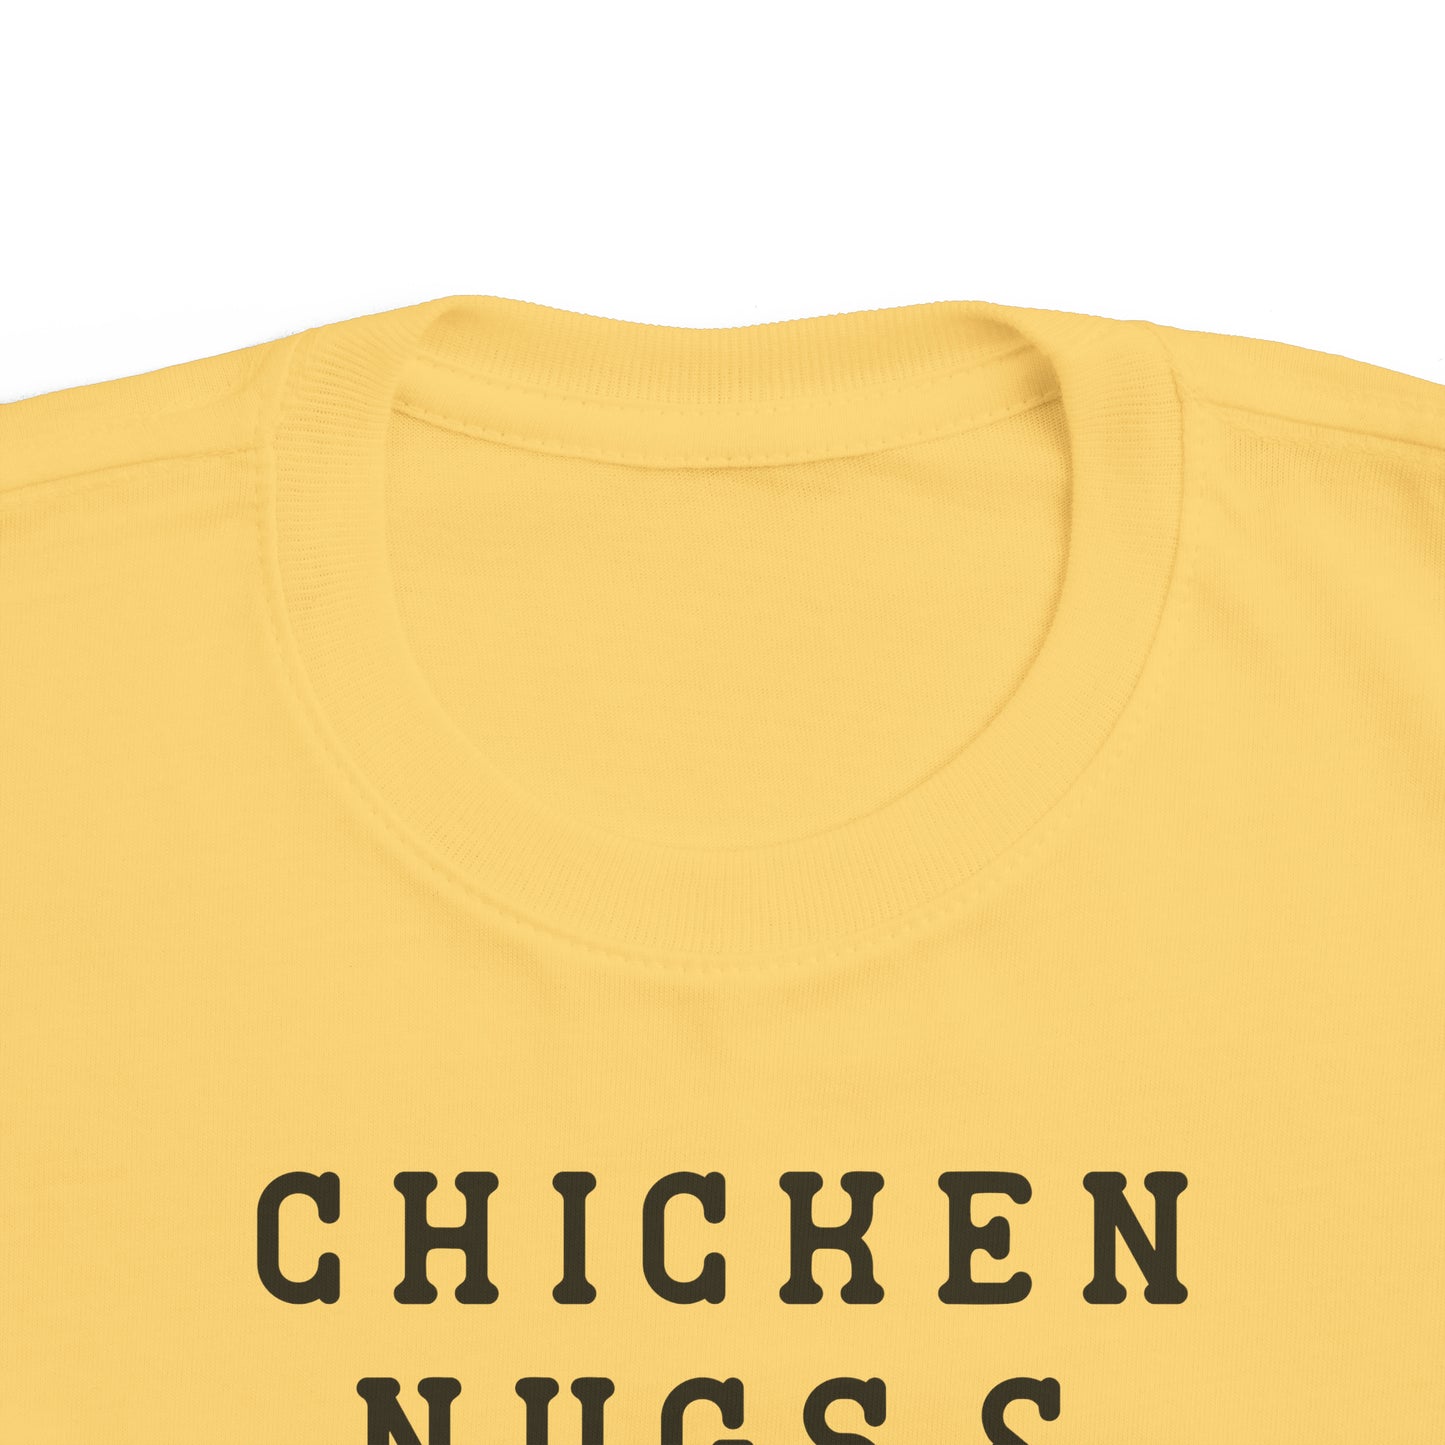 Chicken Nuggs and Mama Hugs Toddler's Tee